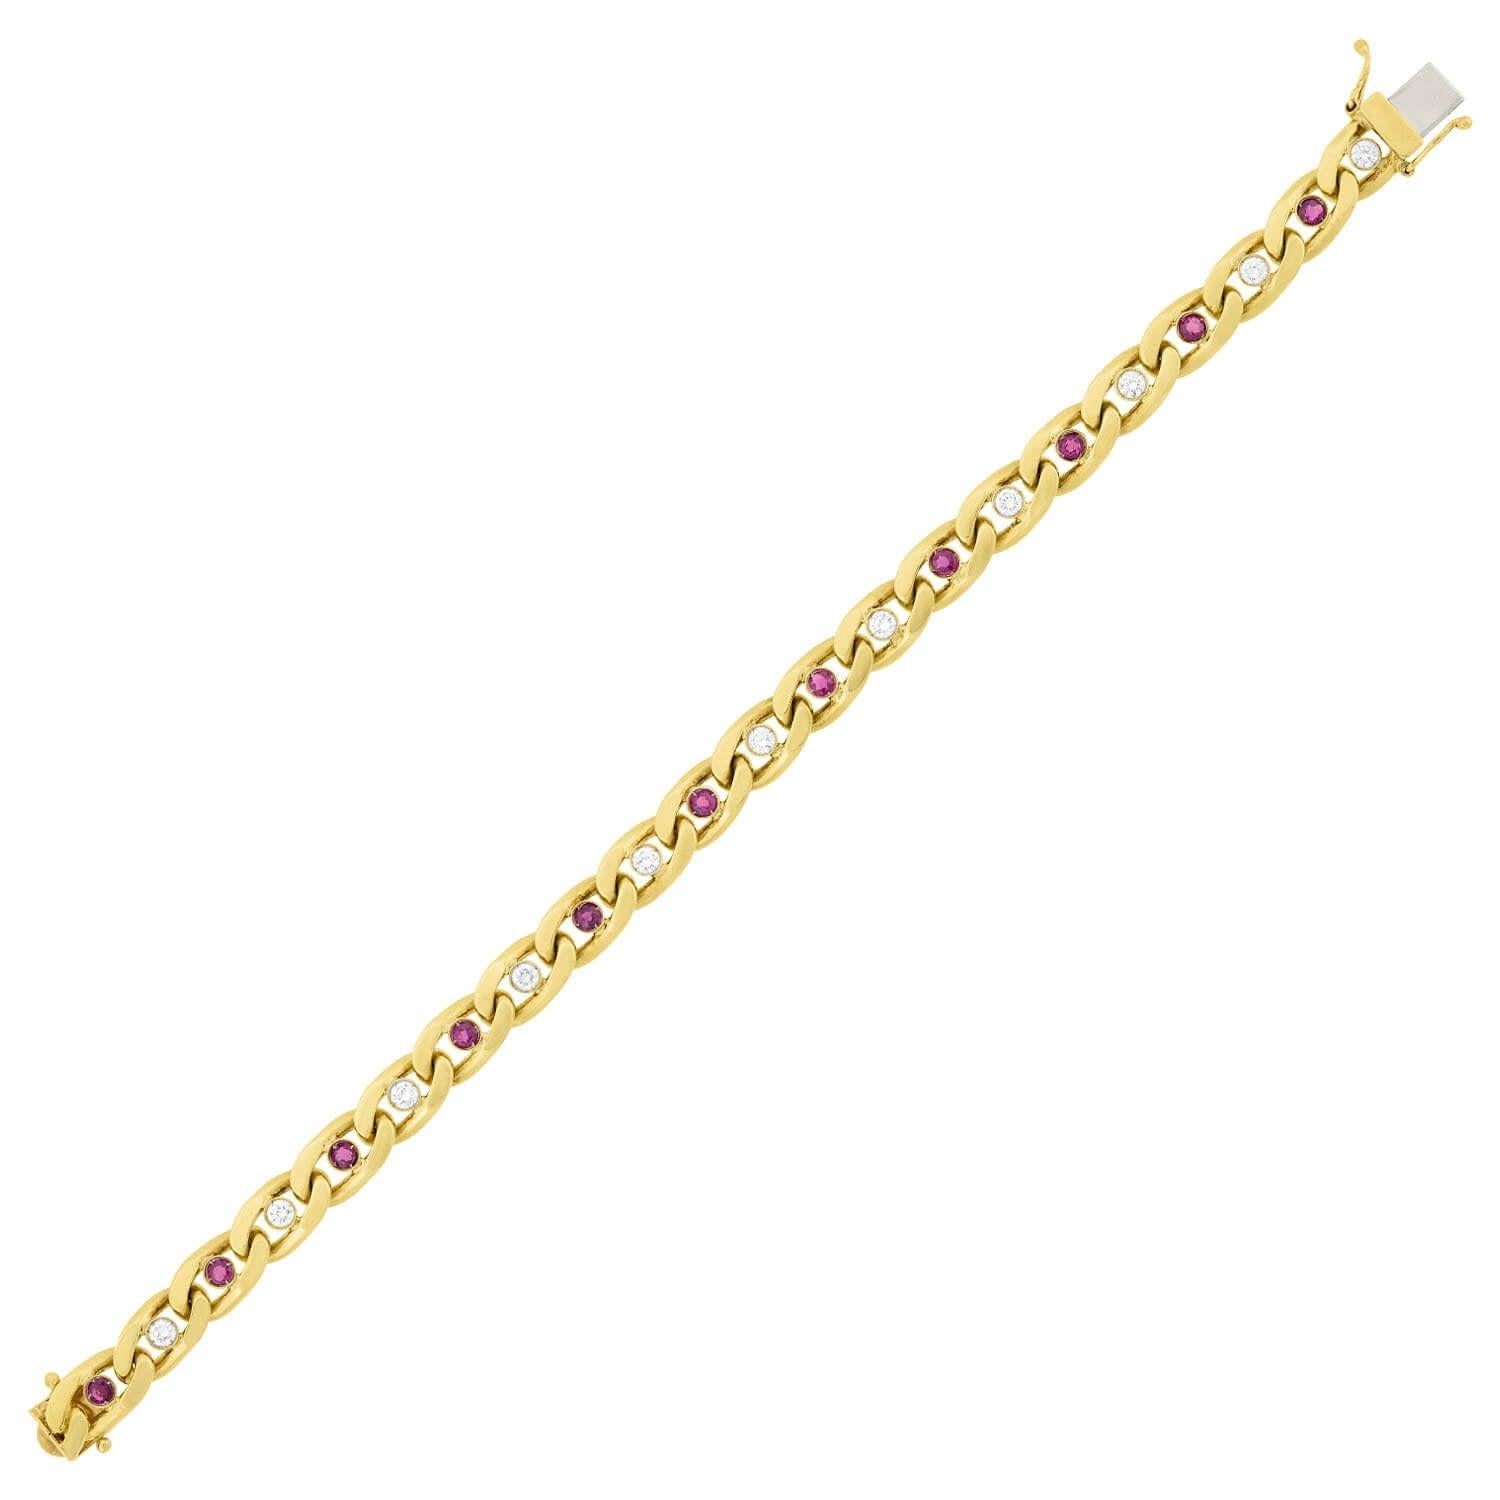 A fantastic Vintage (ca1960s) Cuban link chain bracelet with a very stylish look made by the famed maker Cartier! Made of vibrant 18kt yellow gold and platinum, this amazing piece is comprised of filed oval-shaped links that form a classic Cuban